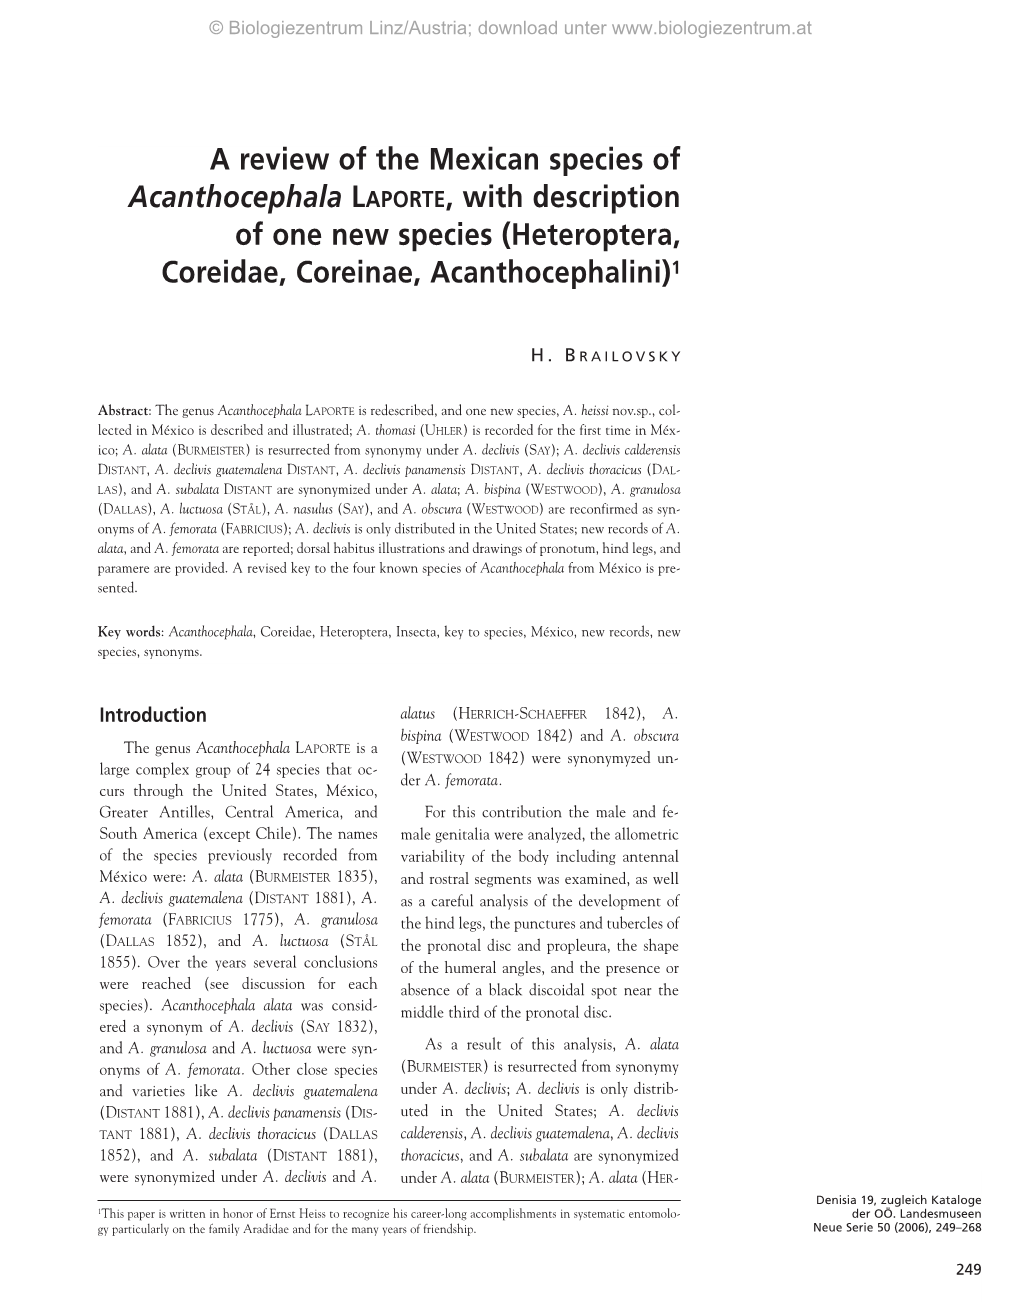 A Review of the Mexican Species of Acanthocephala LAPORTE, with Description of One New Species (Heteroptera, Coreidae, Coreinae, Acanthocephalini)1